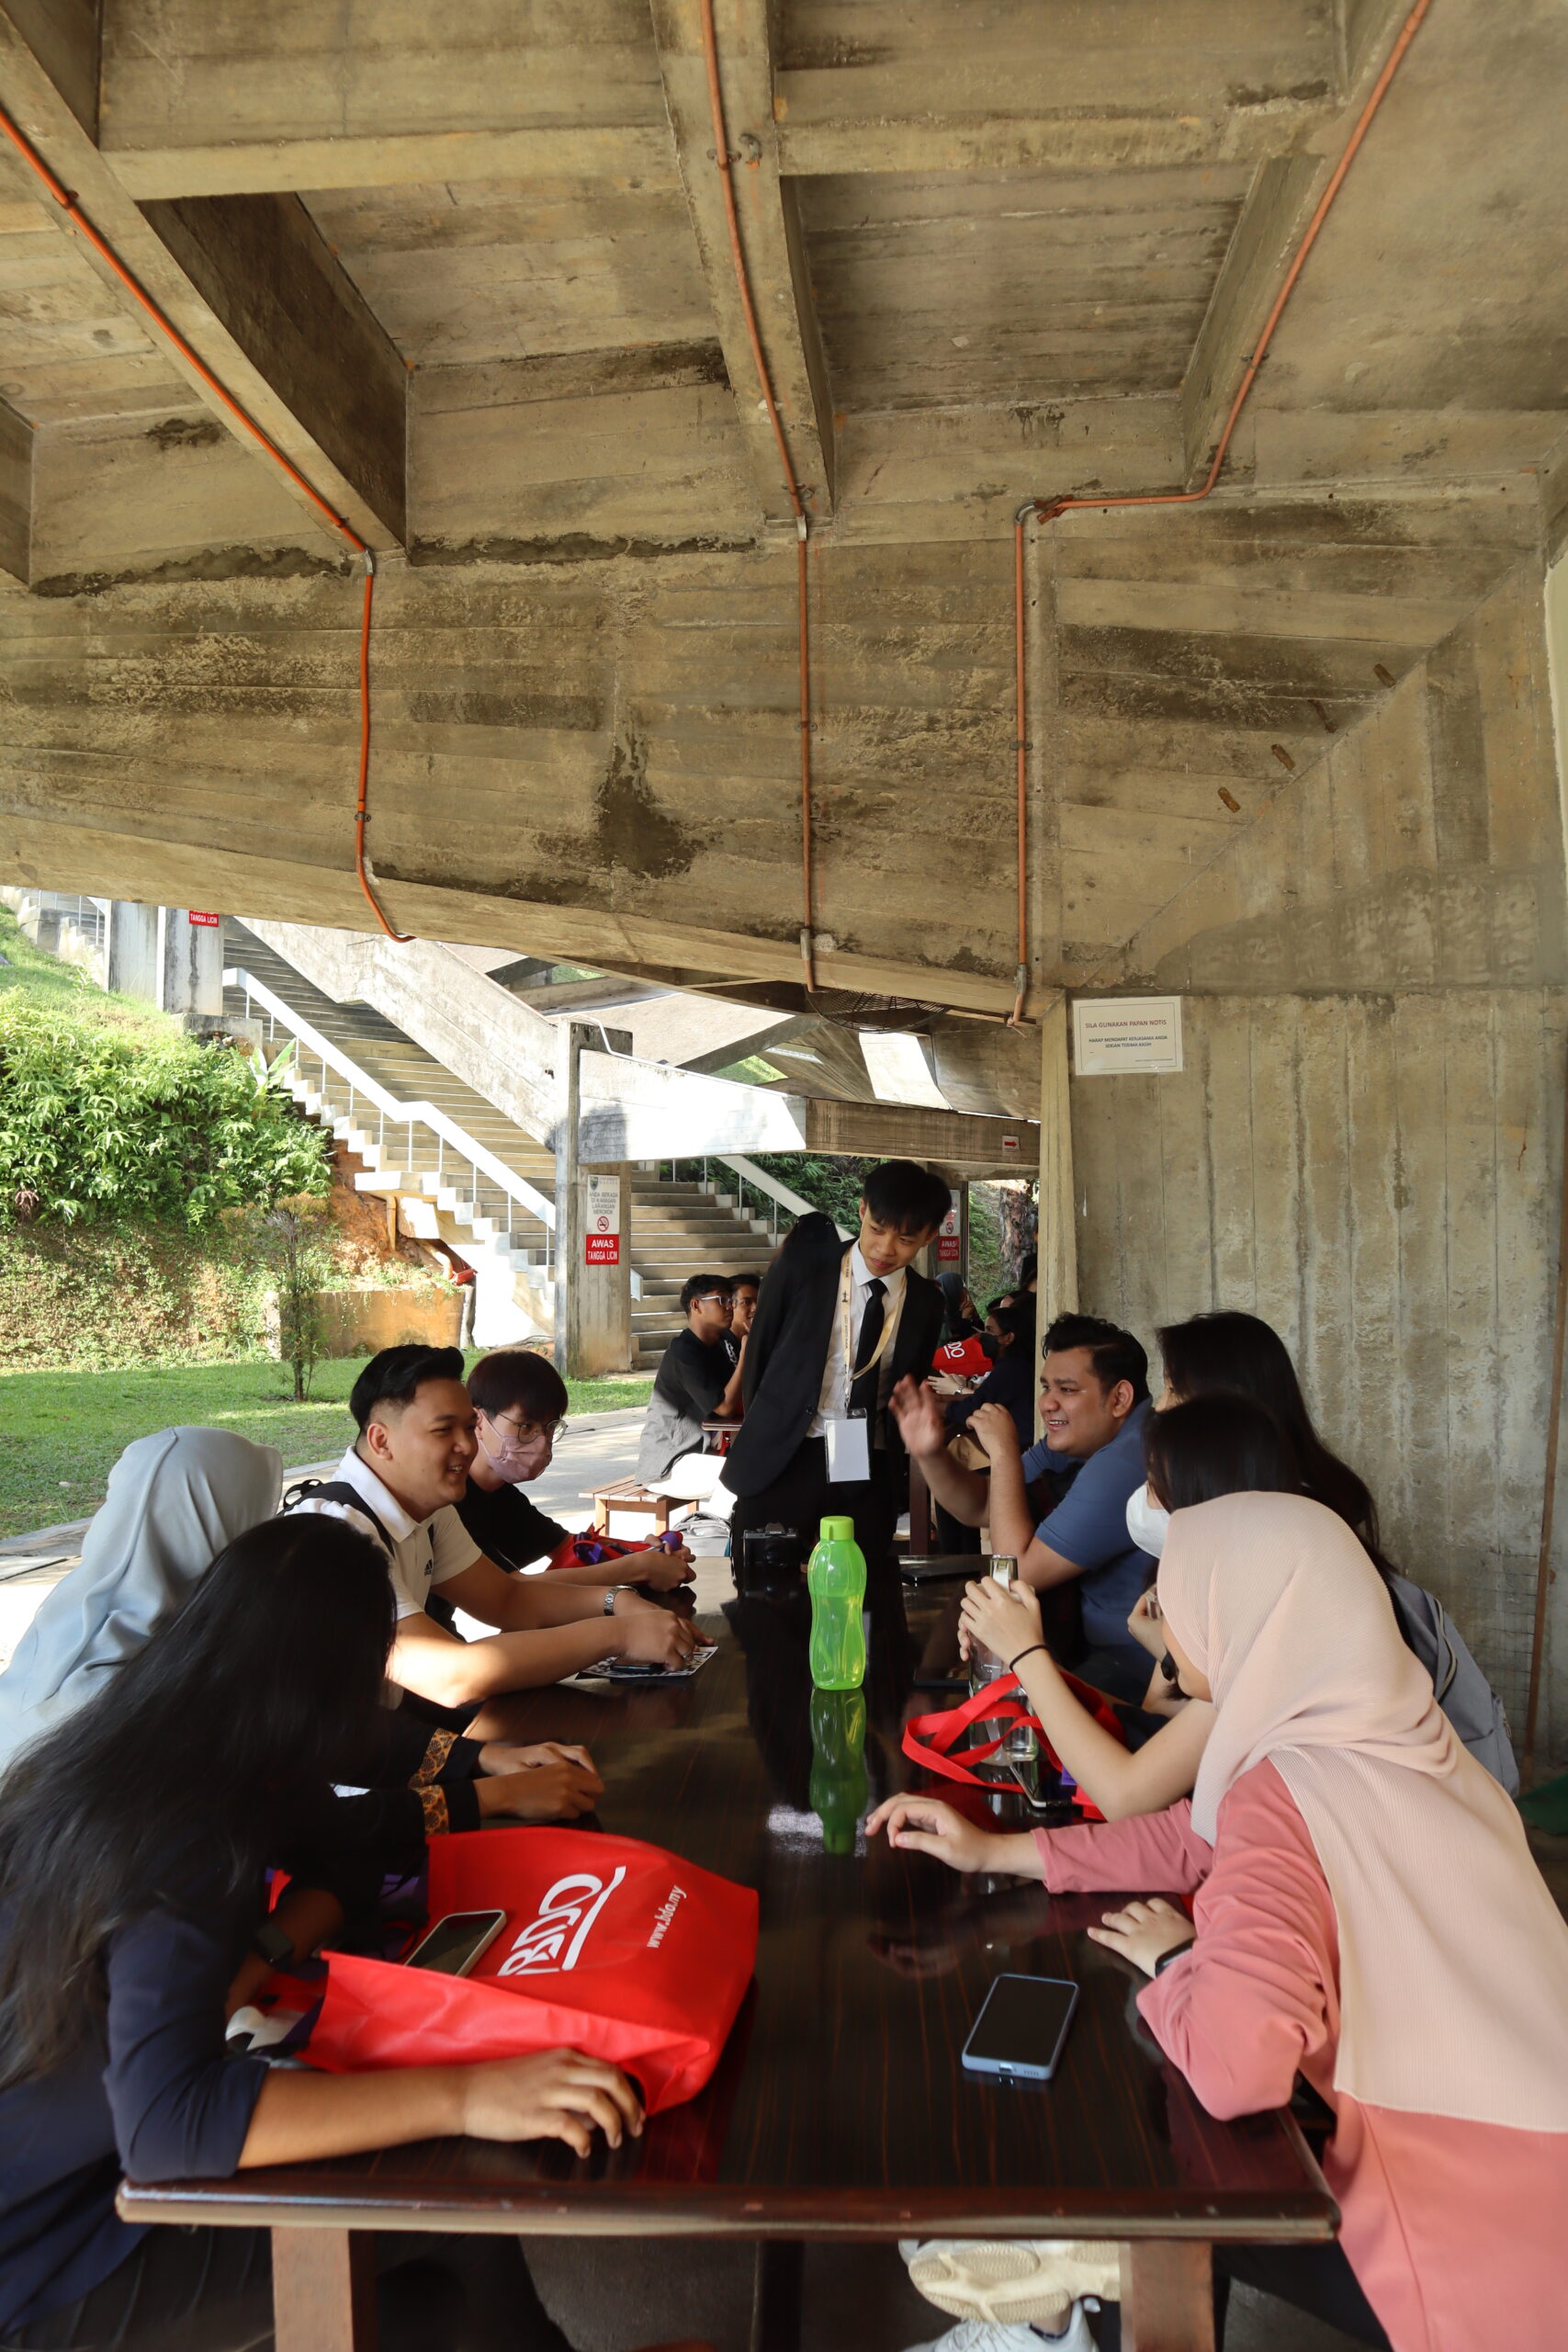 Students discussing at their campus